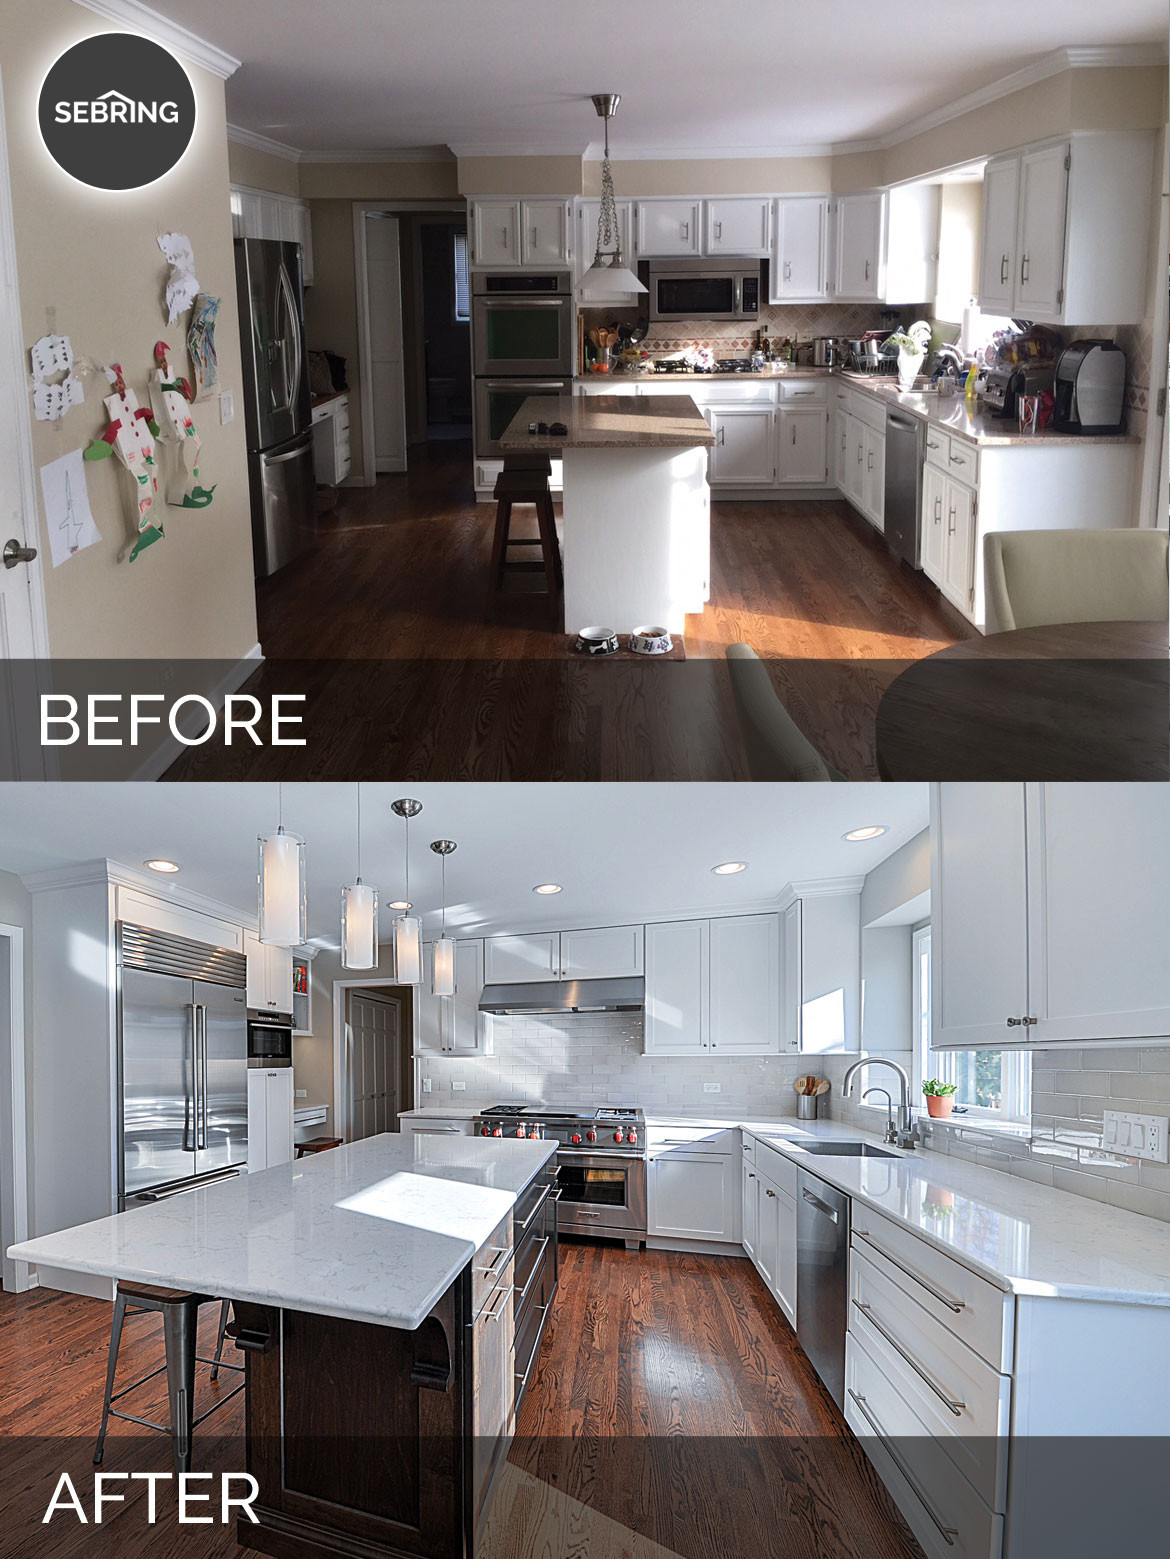 Remodeling Kitchen Before And After
 Derek & Christine s Kitchen Before & After